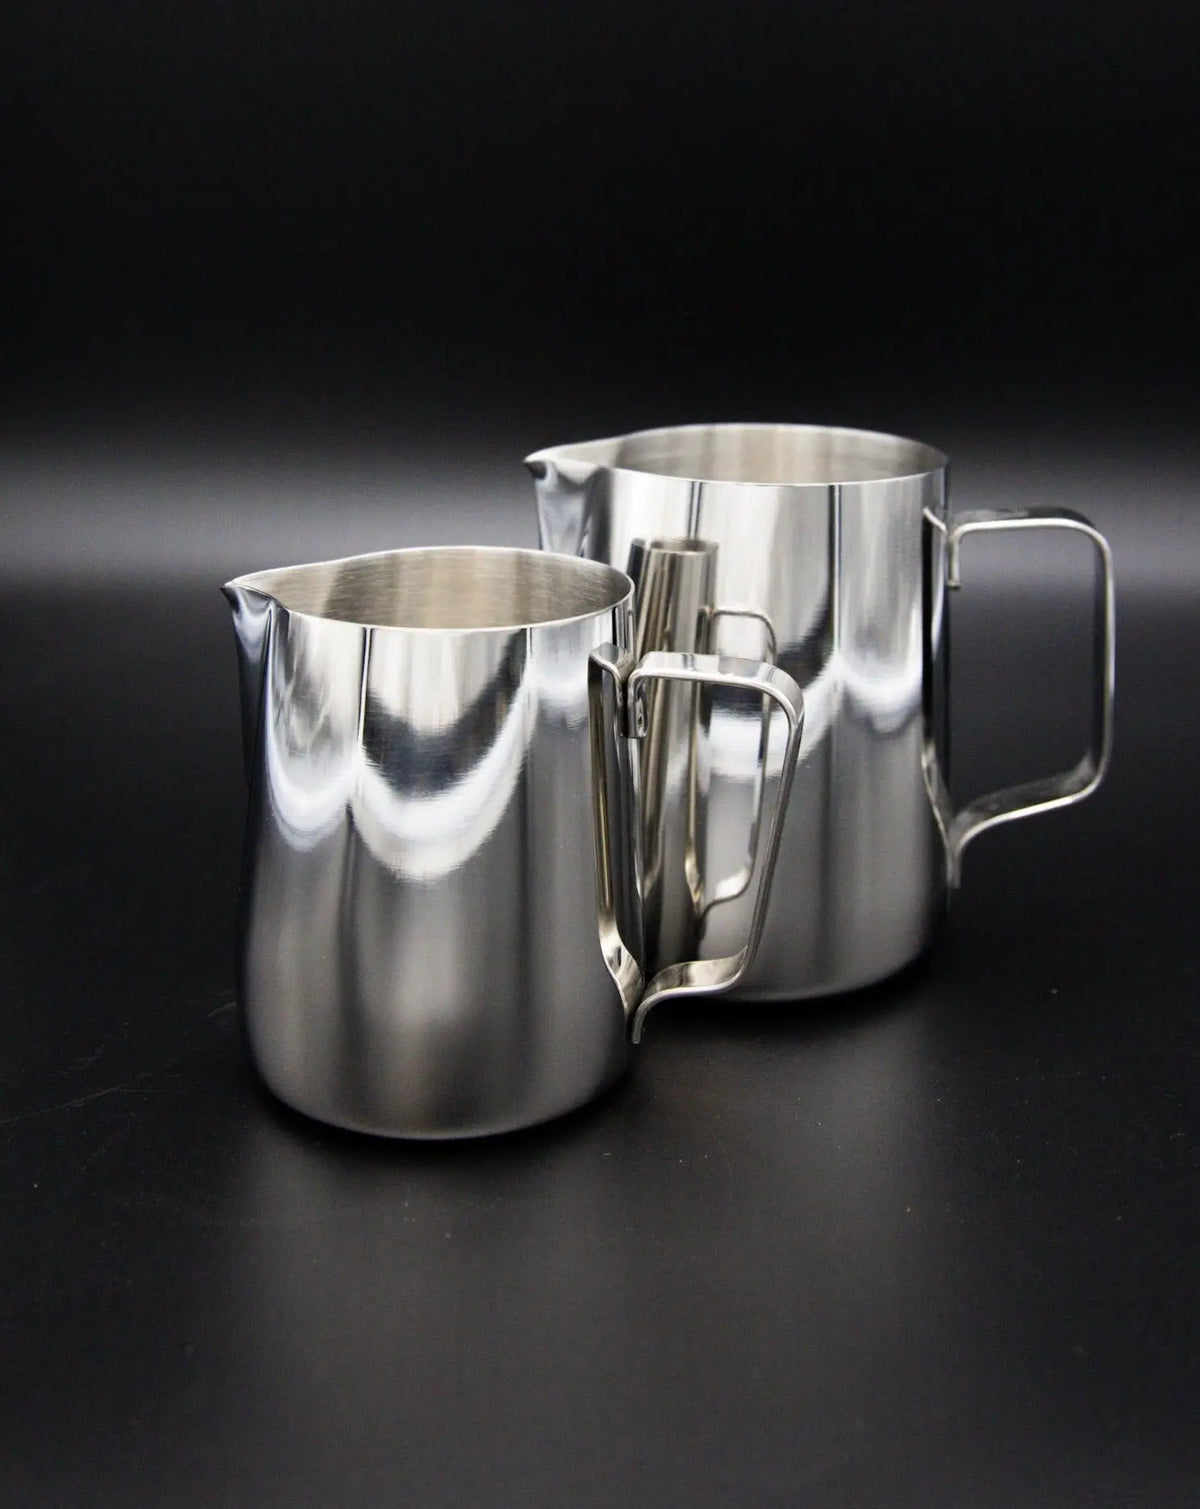 Rocket Milk Frothing Picture - Stainless Steel - Seattle Coffee Gear